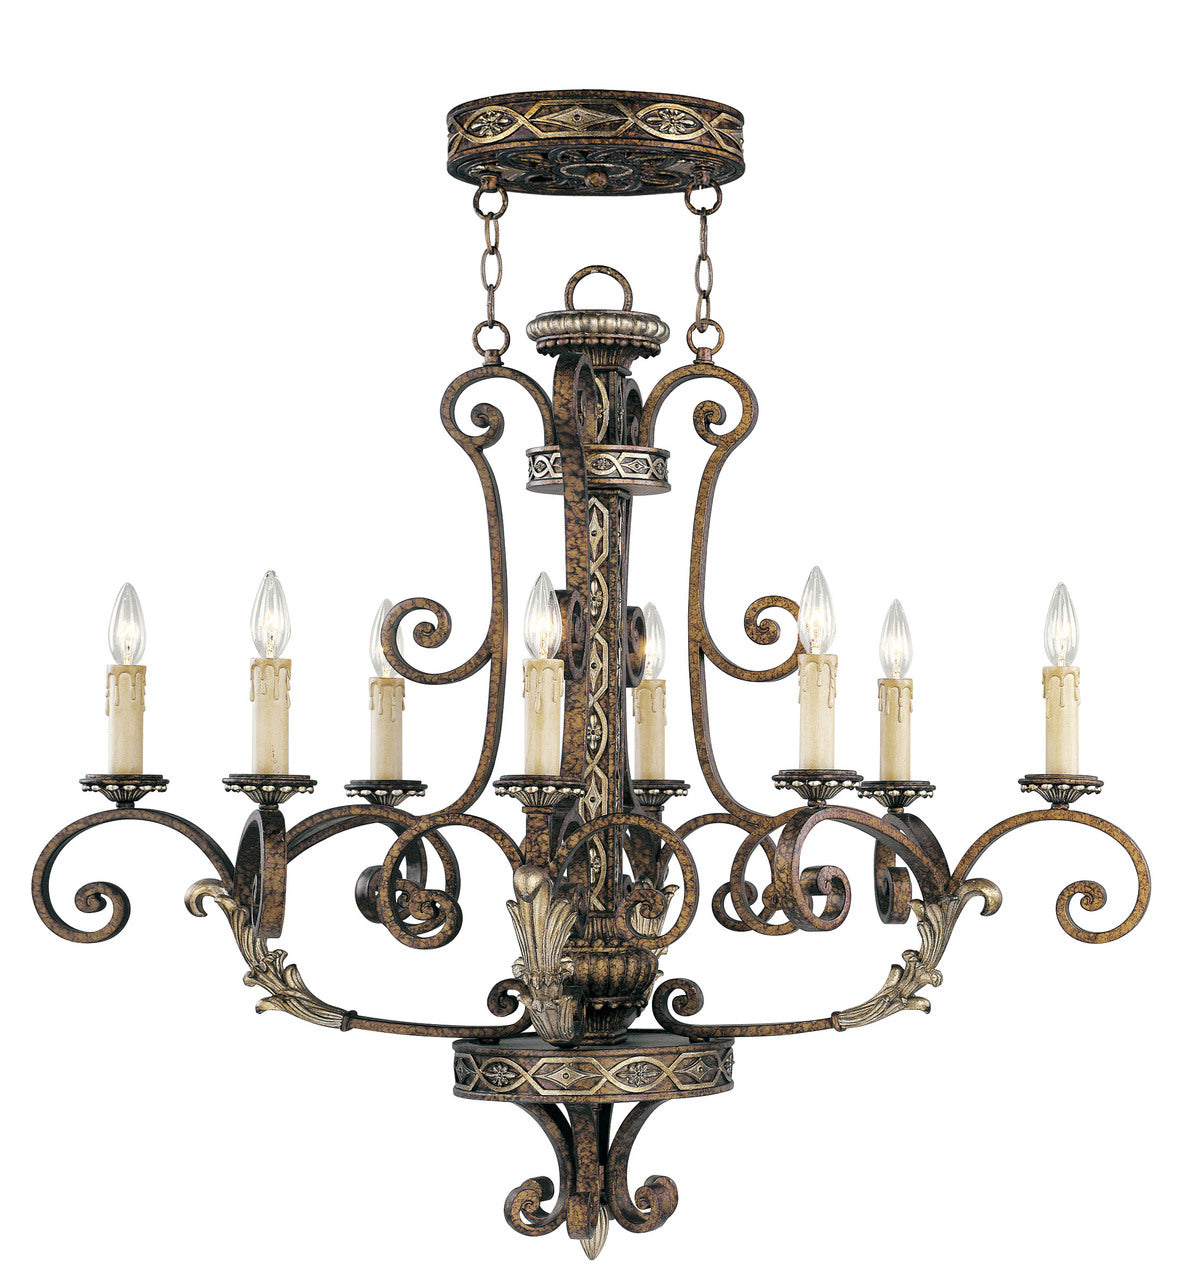 LIVEX Lighting 8538-64 Seville Oval Chandelier in Palacial Bronze with Gilded Accents (8 Light)